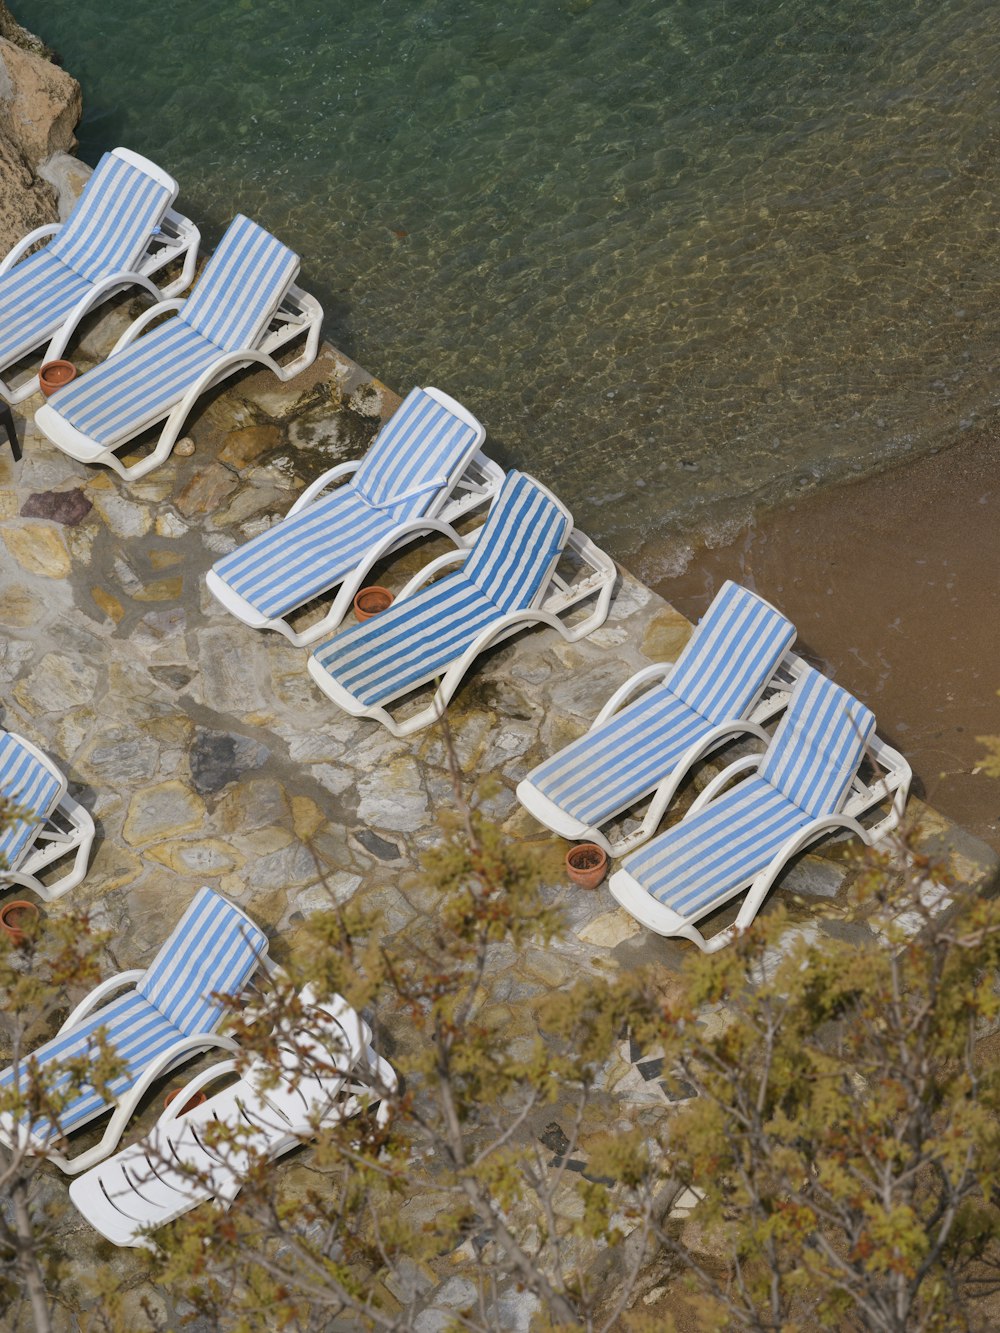 a row of lawn chairs sitting next to a body of water